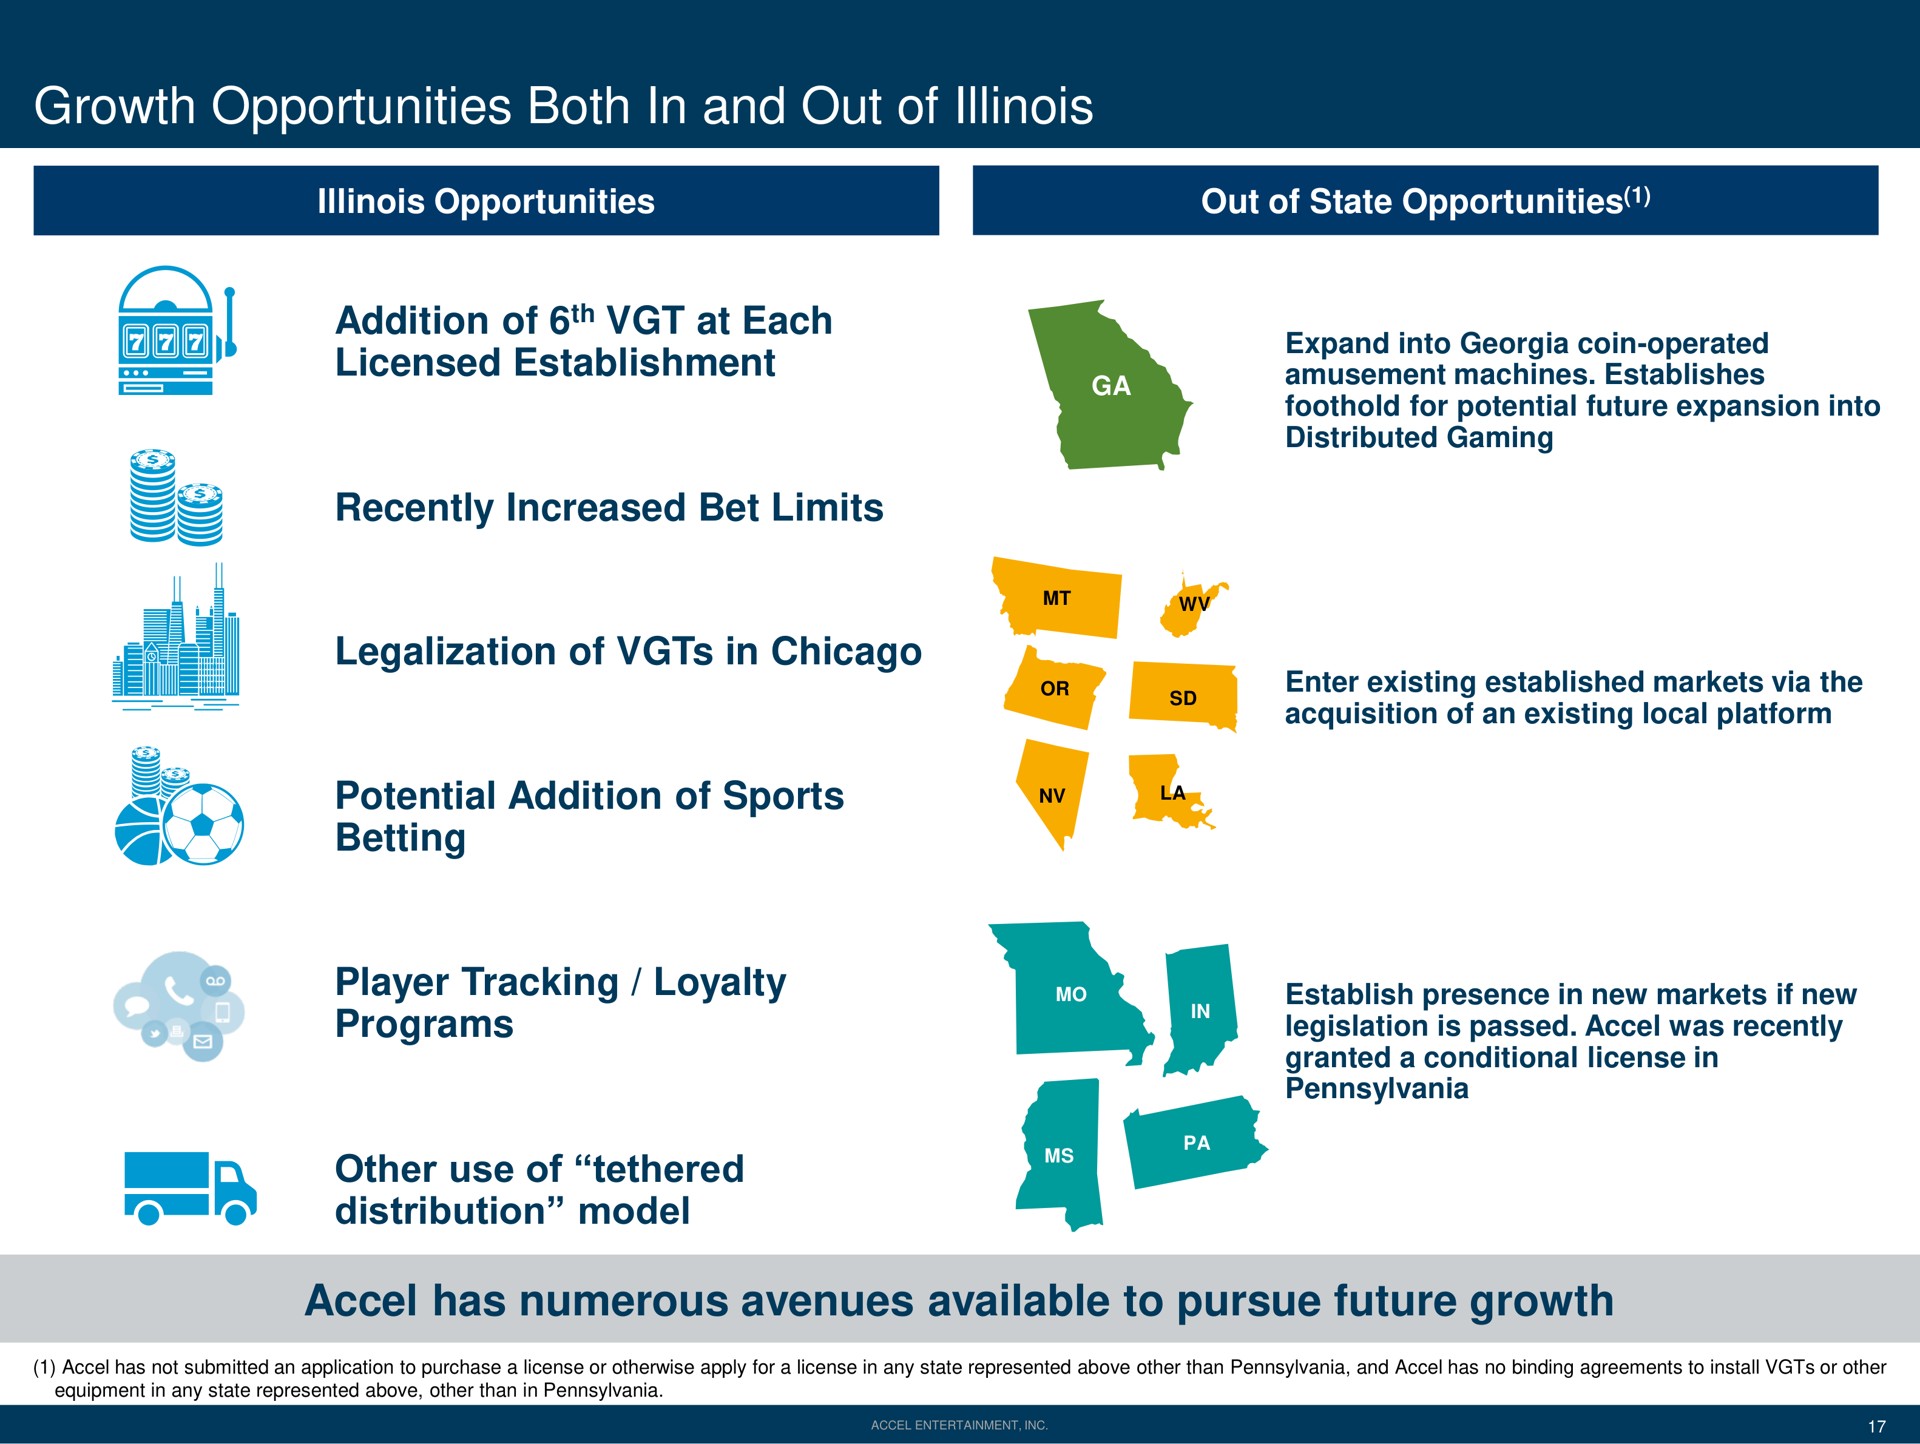 growth opportunities both in and out of addition of at each licensed establishment recently increased bet limits legalization of in potential addition of sports betting player tracking loyalty programs other use of tethered distribution model has numerous avenues available to pursue future growth | Accel Entertaiment